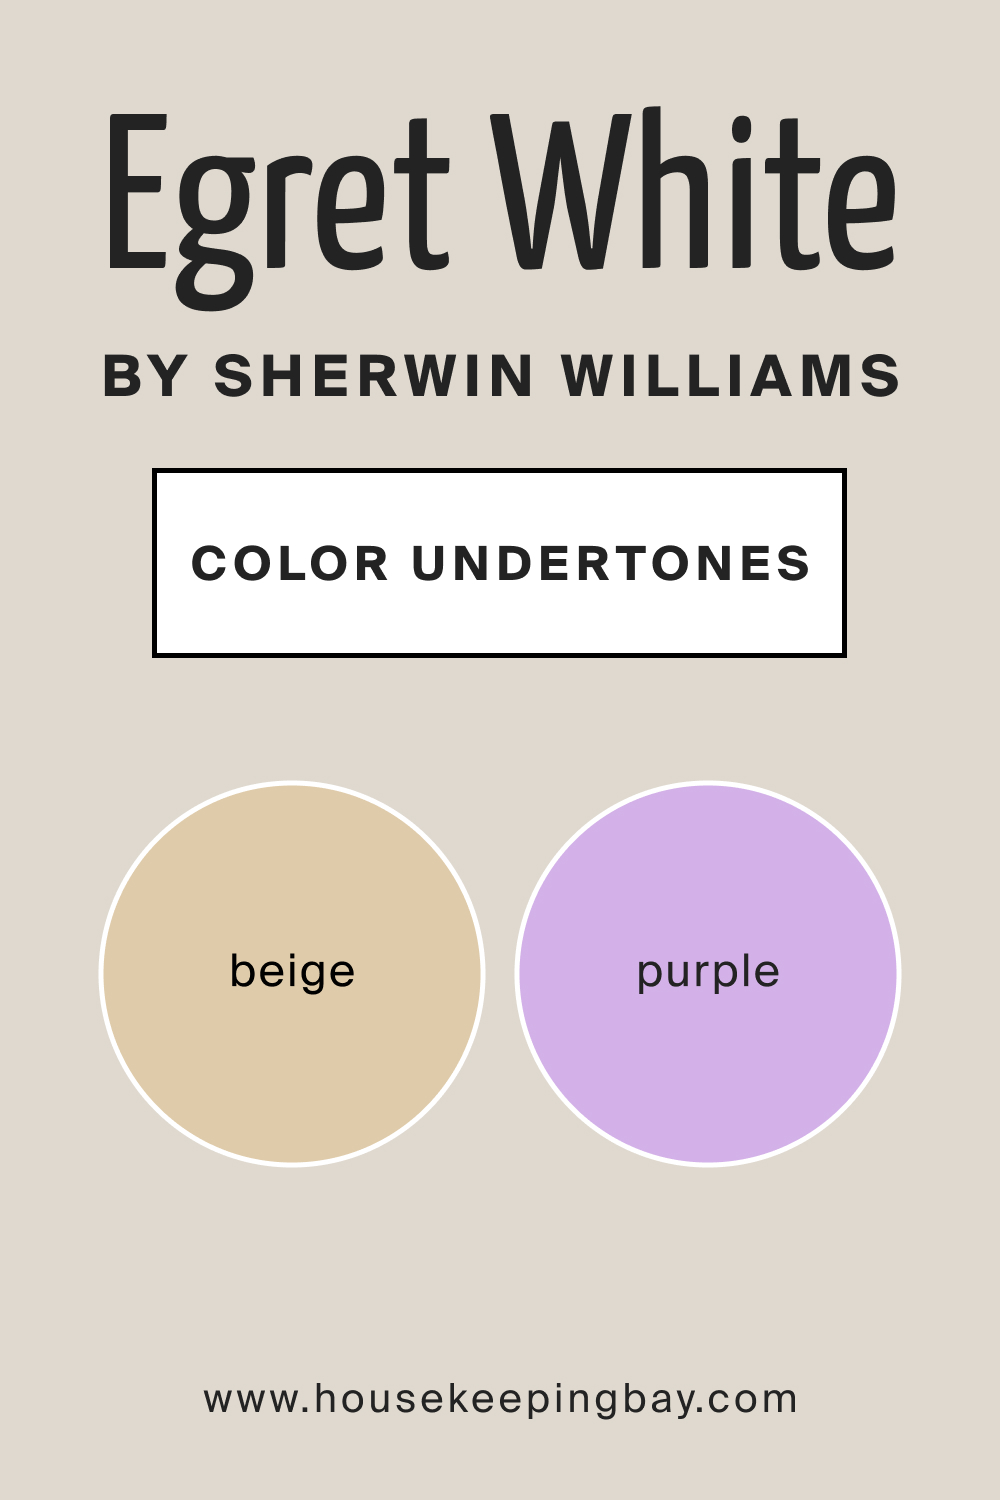 Egret White SW 7570 by Sherwin Williams Color Undertones